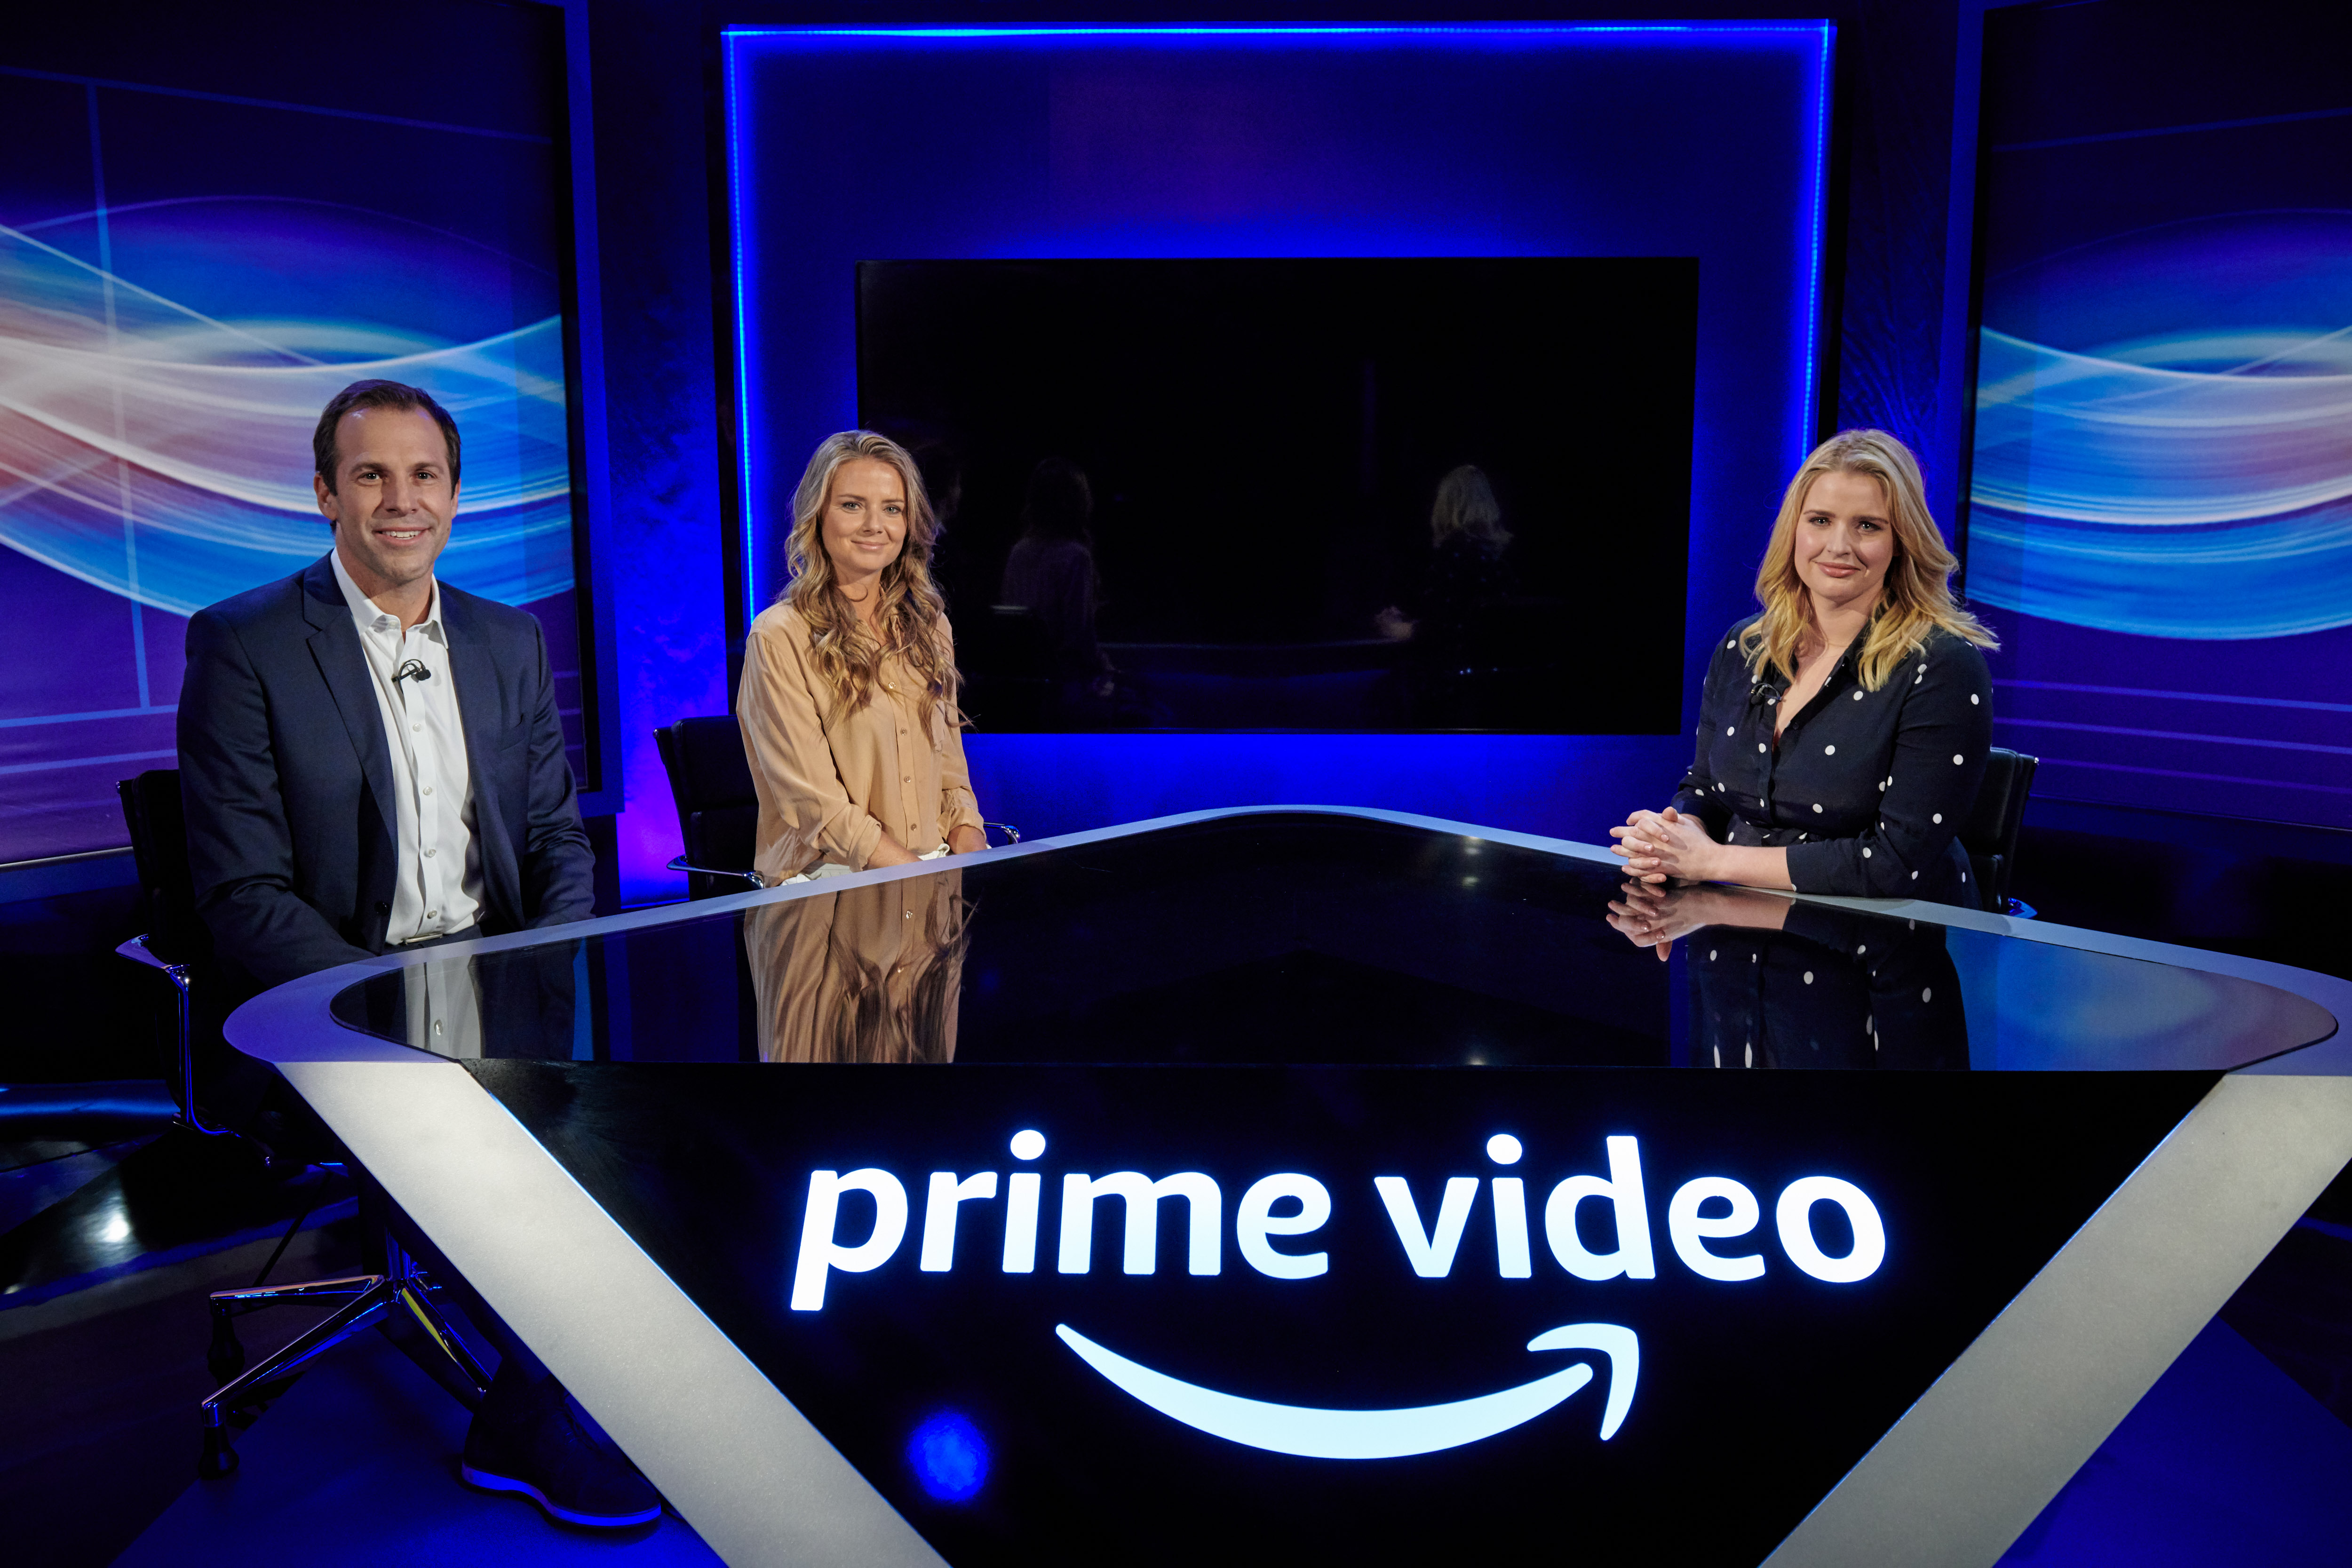 Amazon Prime Video serves up live and exclusive US Open tennis coverage in 2019 Amazon UK